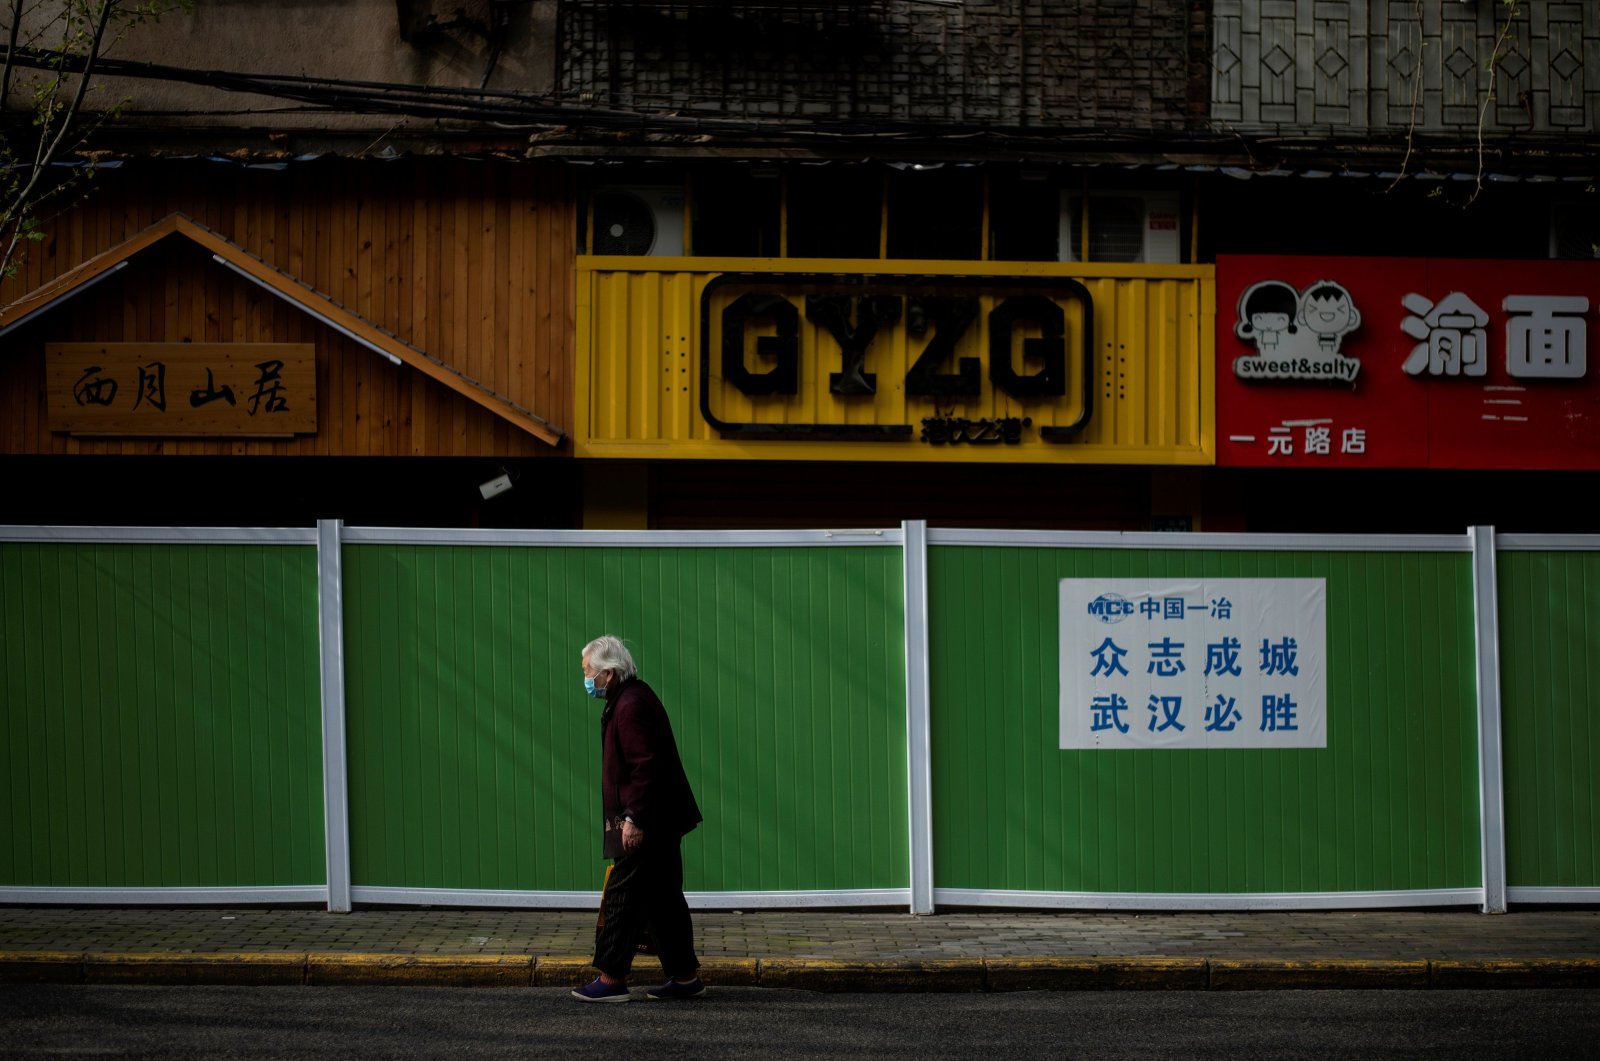 An elderly woman wearing a face mask walks along a street in Wuhan, in China's central Hubei province, Wednesday, April 1, 2020. (AFP Photo)